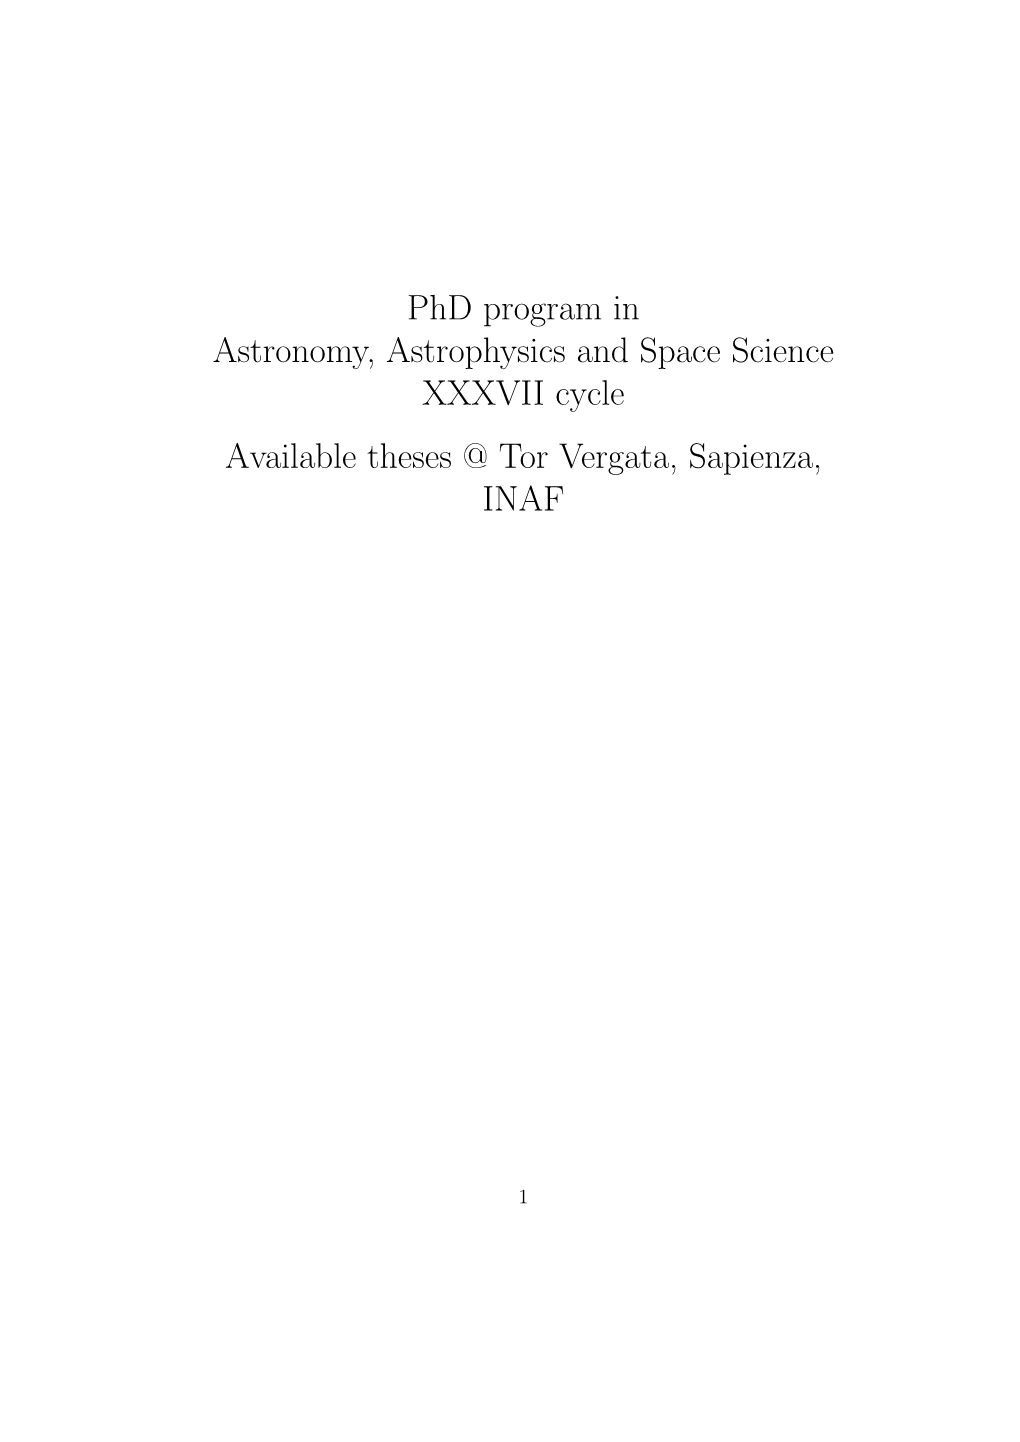 Phd Program in Astronomy, Astrophysics and Space Science XXXVII Cycle Available Theses @ Tor Vergata, Sapienza, INAF